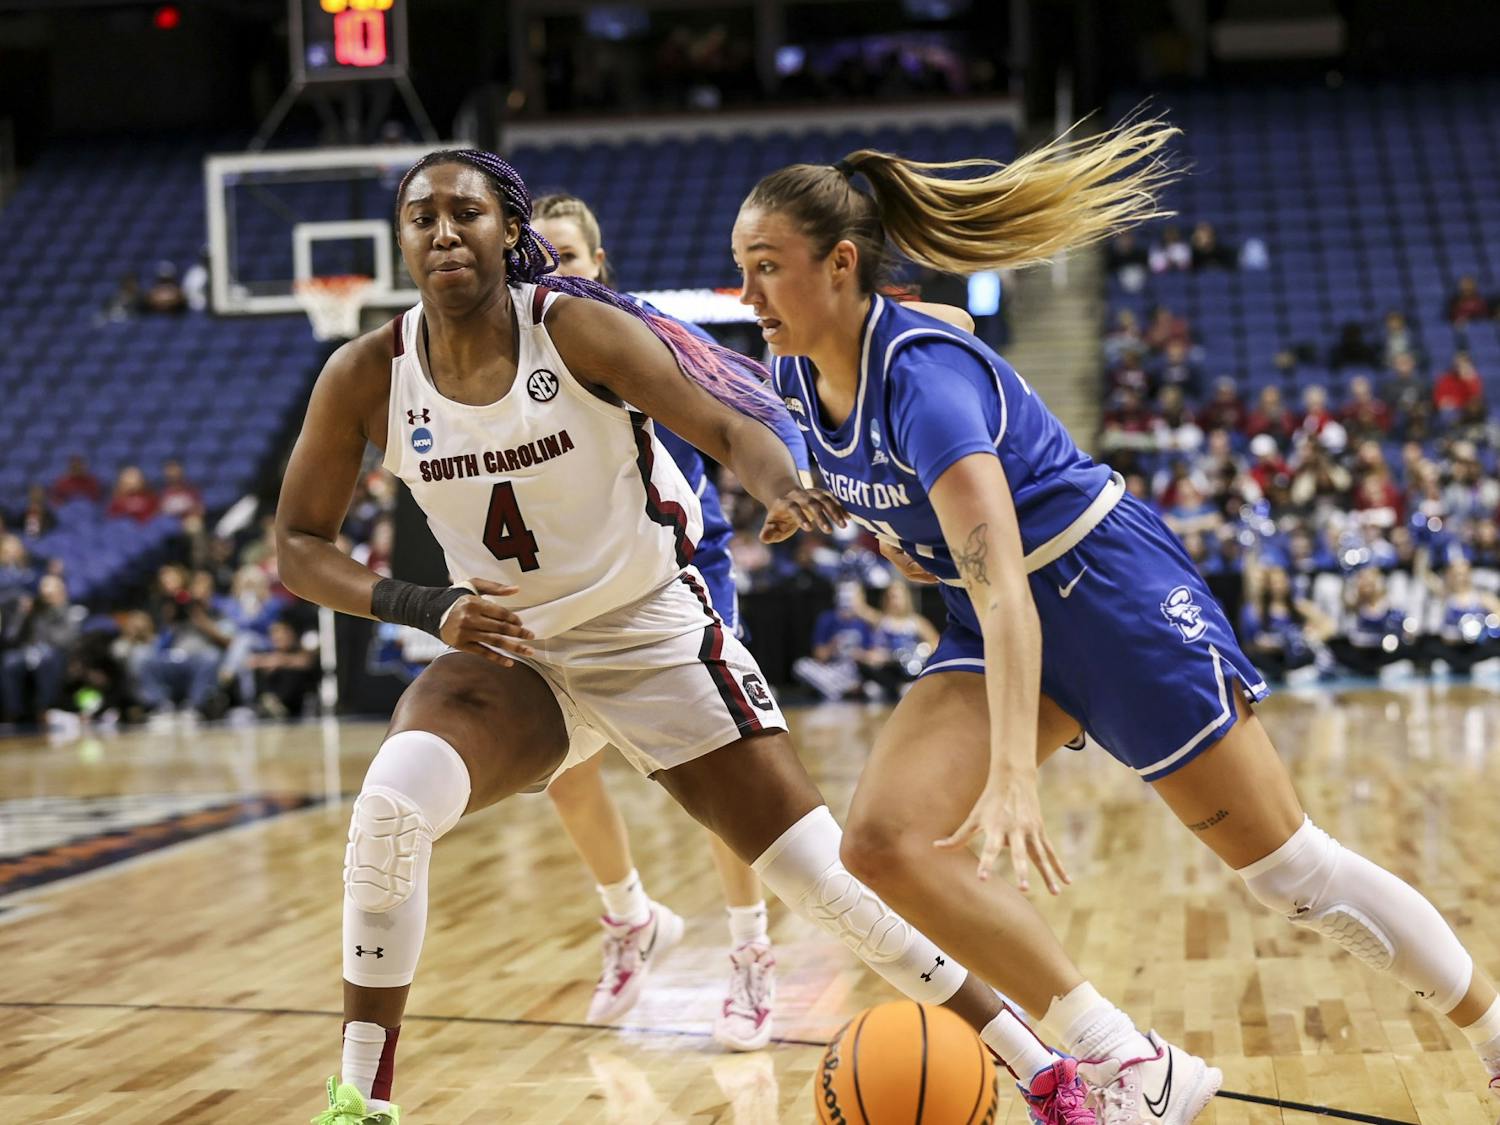 Junior forward Aliyah Boston defending during the first quarter of South Carolina's 80-50 victory over Creighton during the Elite Eight on Sunday, March 27, 2022. The win propelled the team to the Final Four.&nbsp;